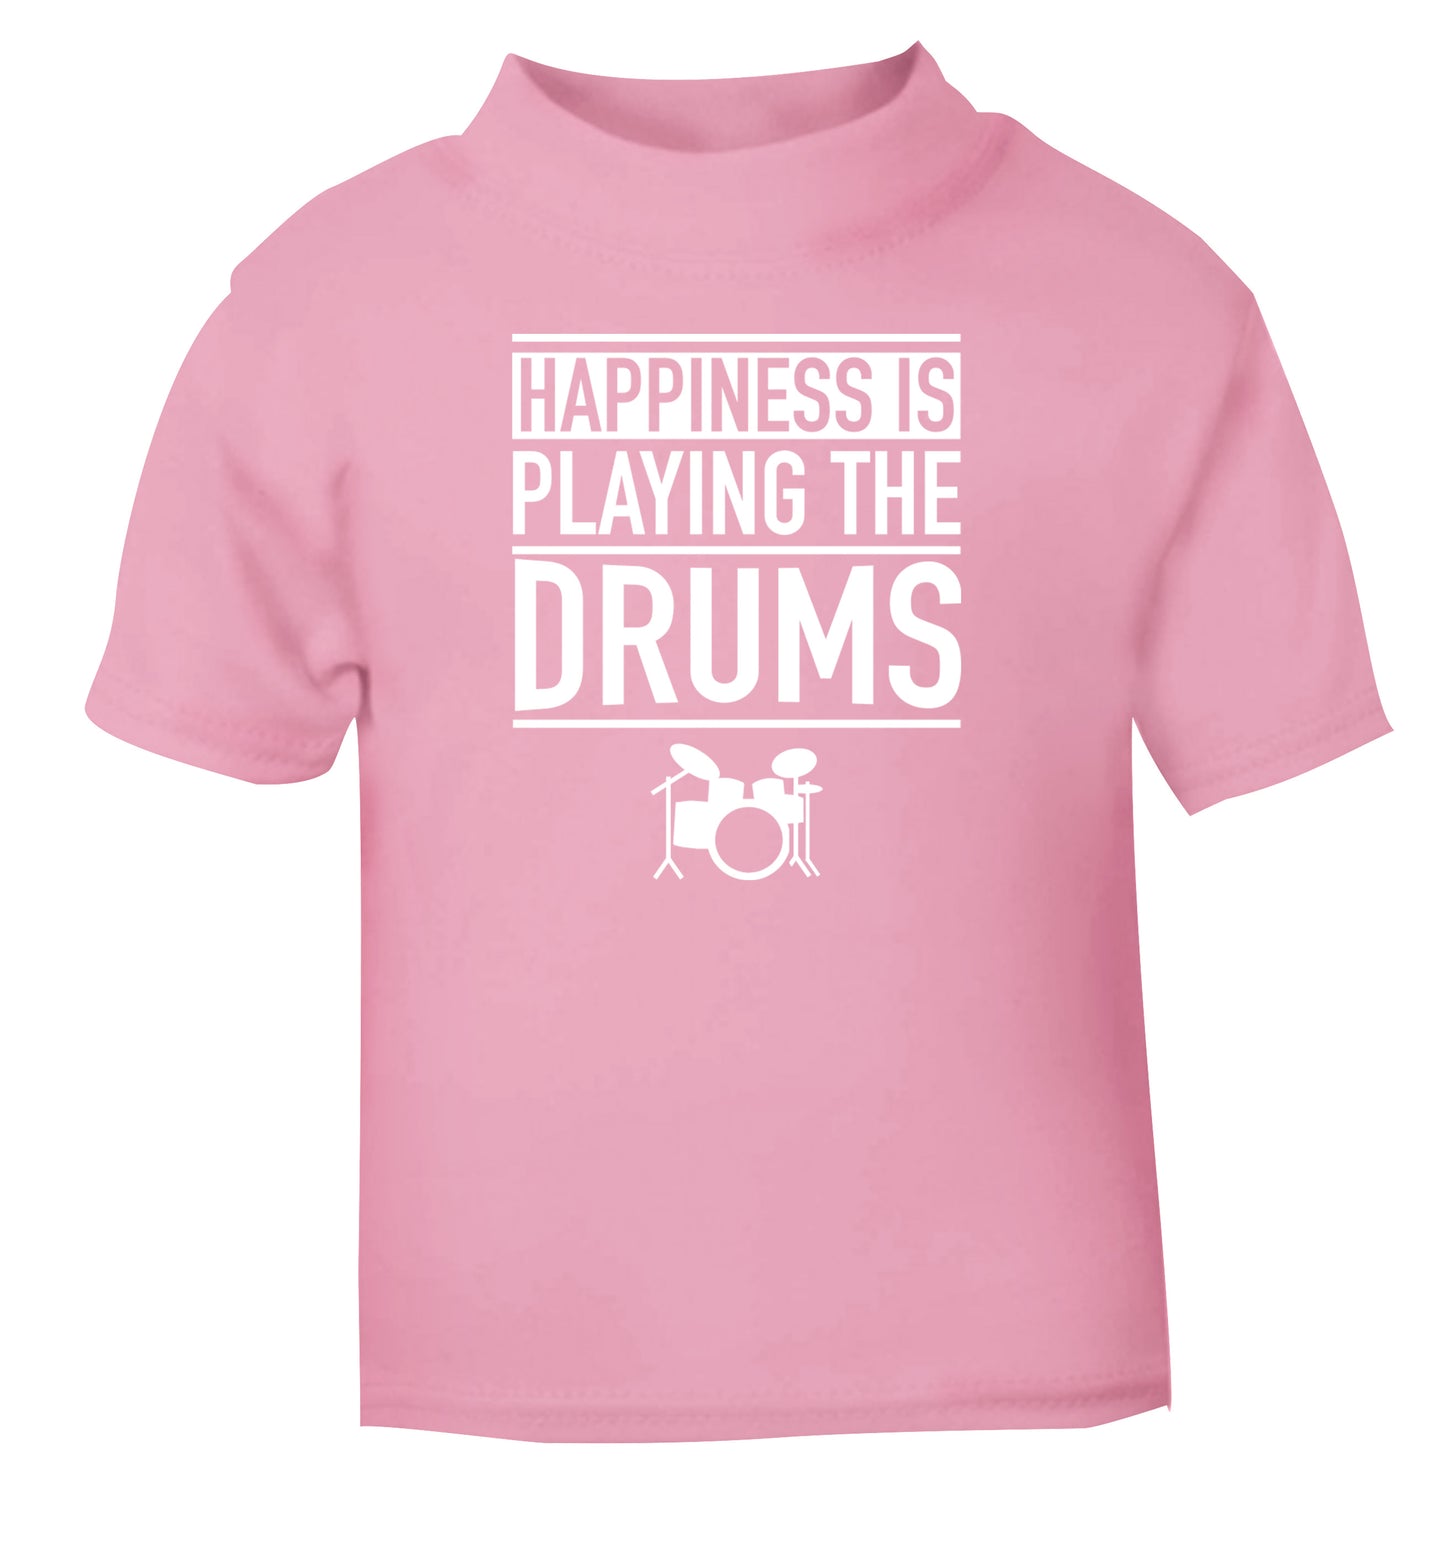 Happiness is playing the drums light pink Baby Toddler Tshirt 2 Years